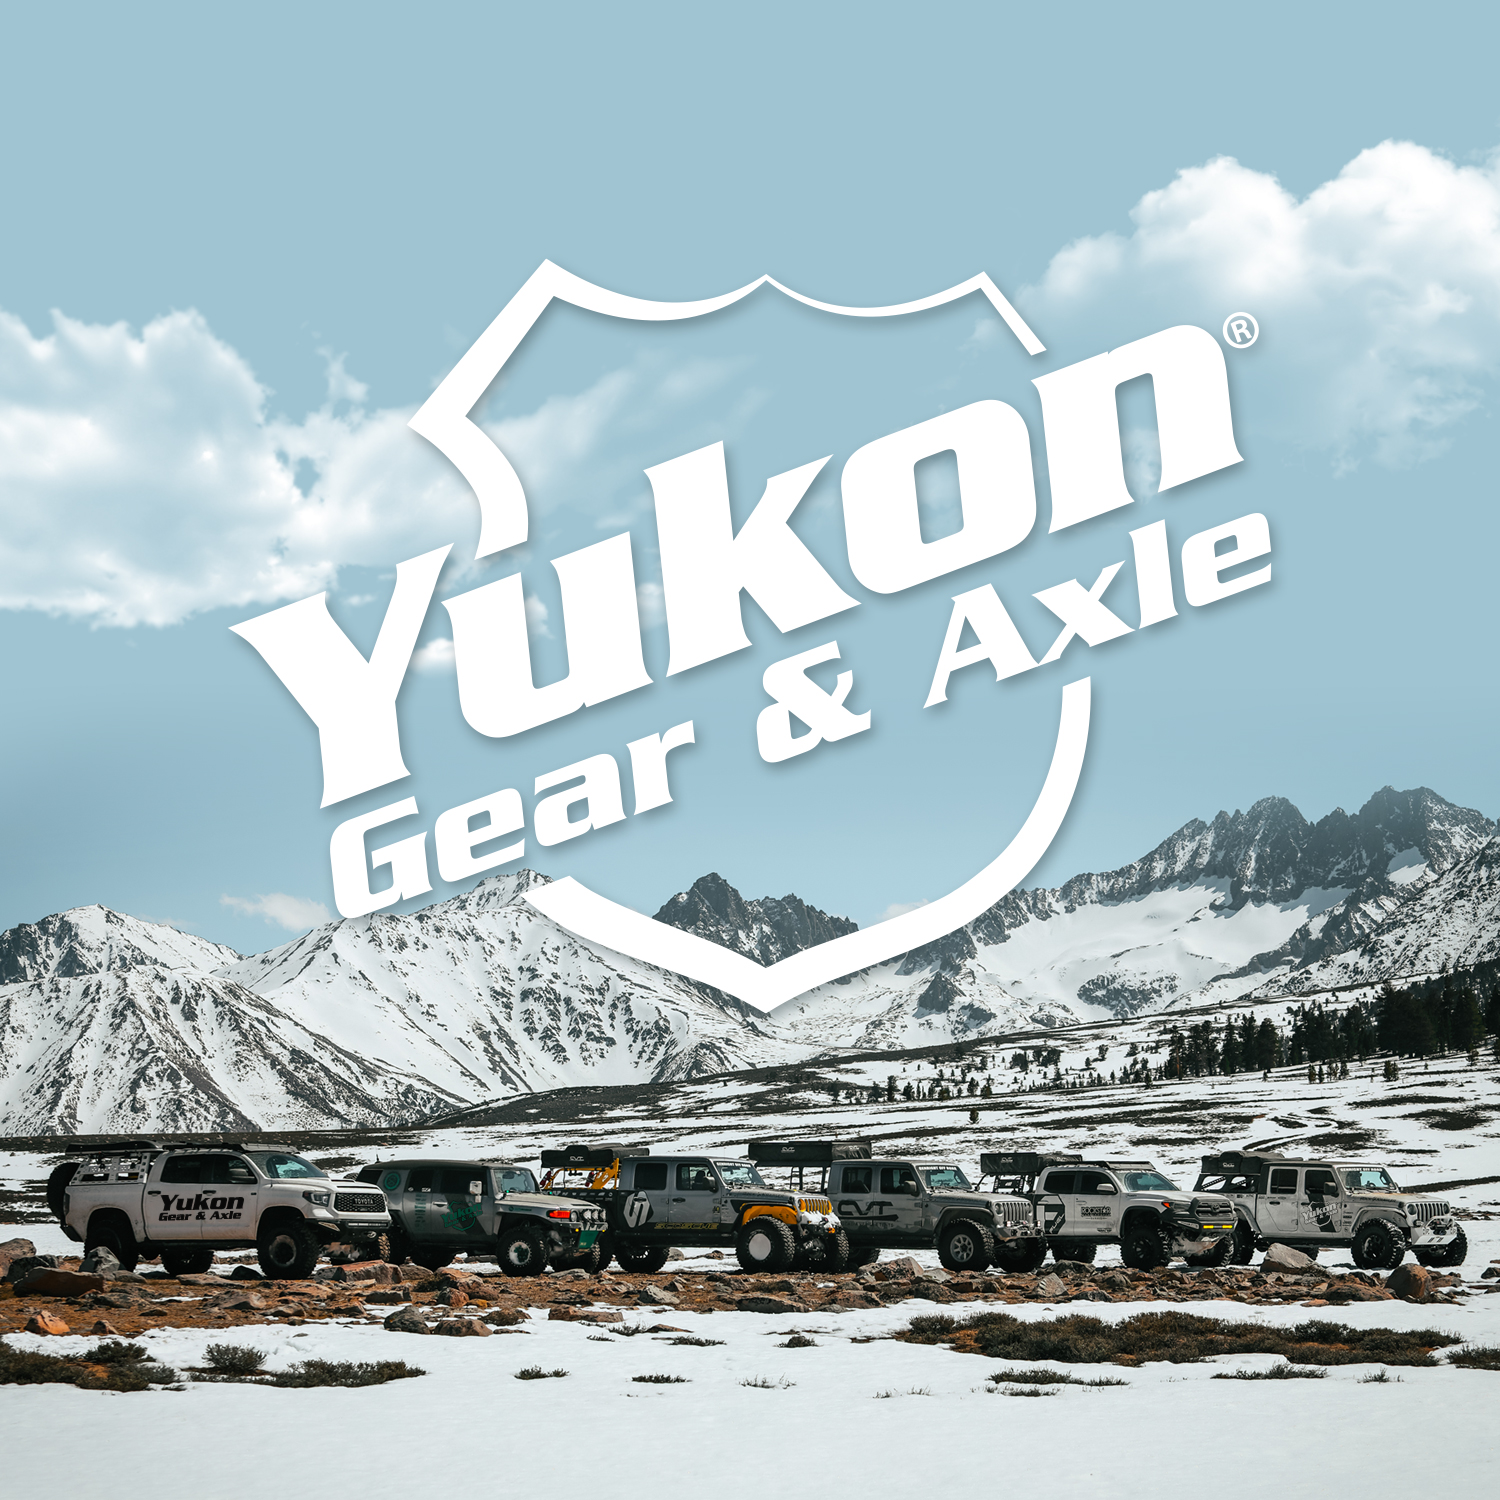 Yukon Axle Bearing Puller for Ford 9” and Dana 44 Differentials 